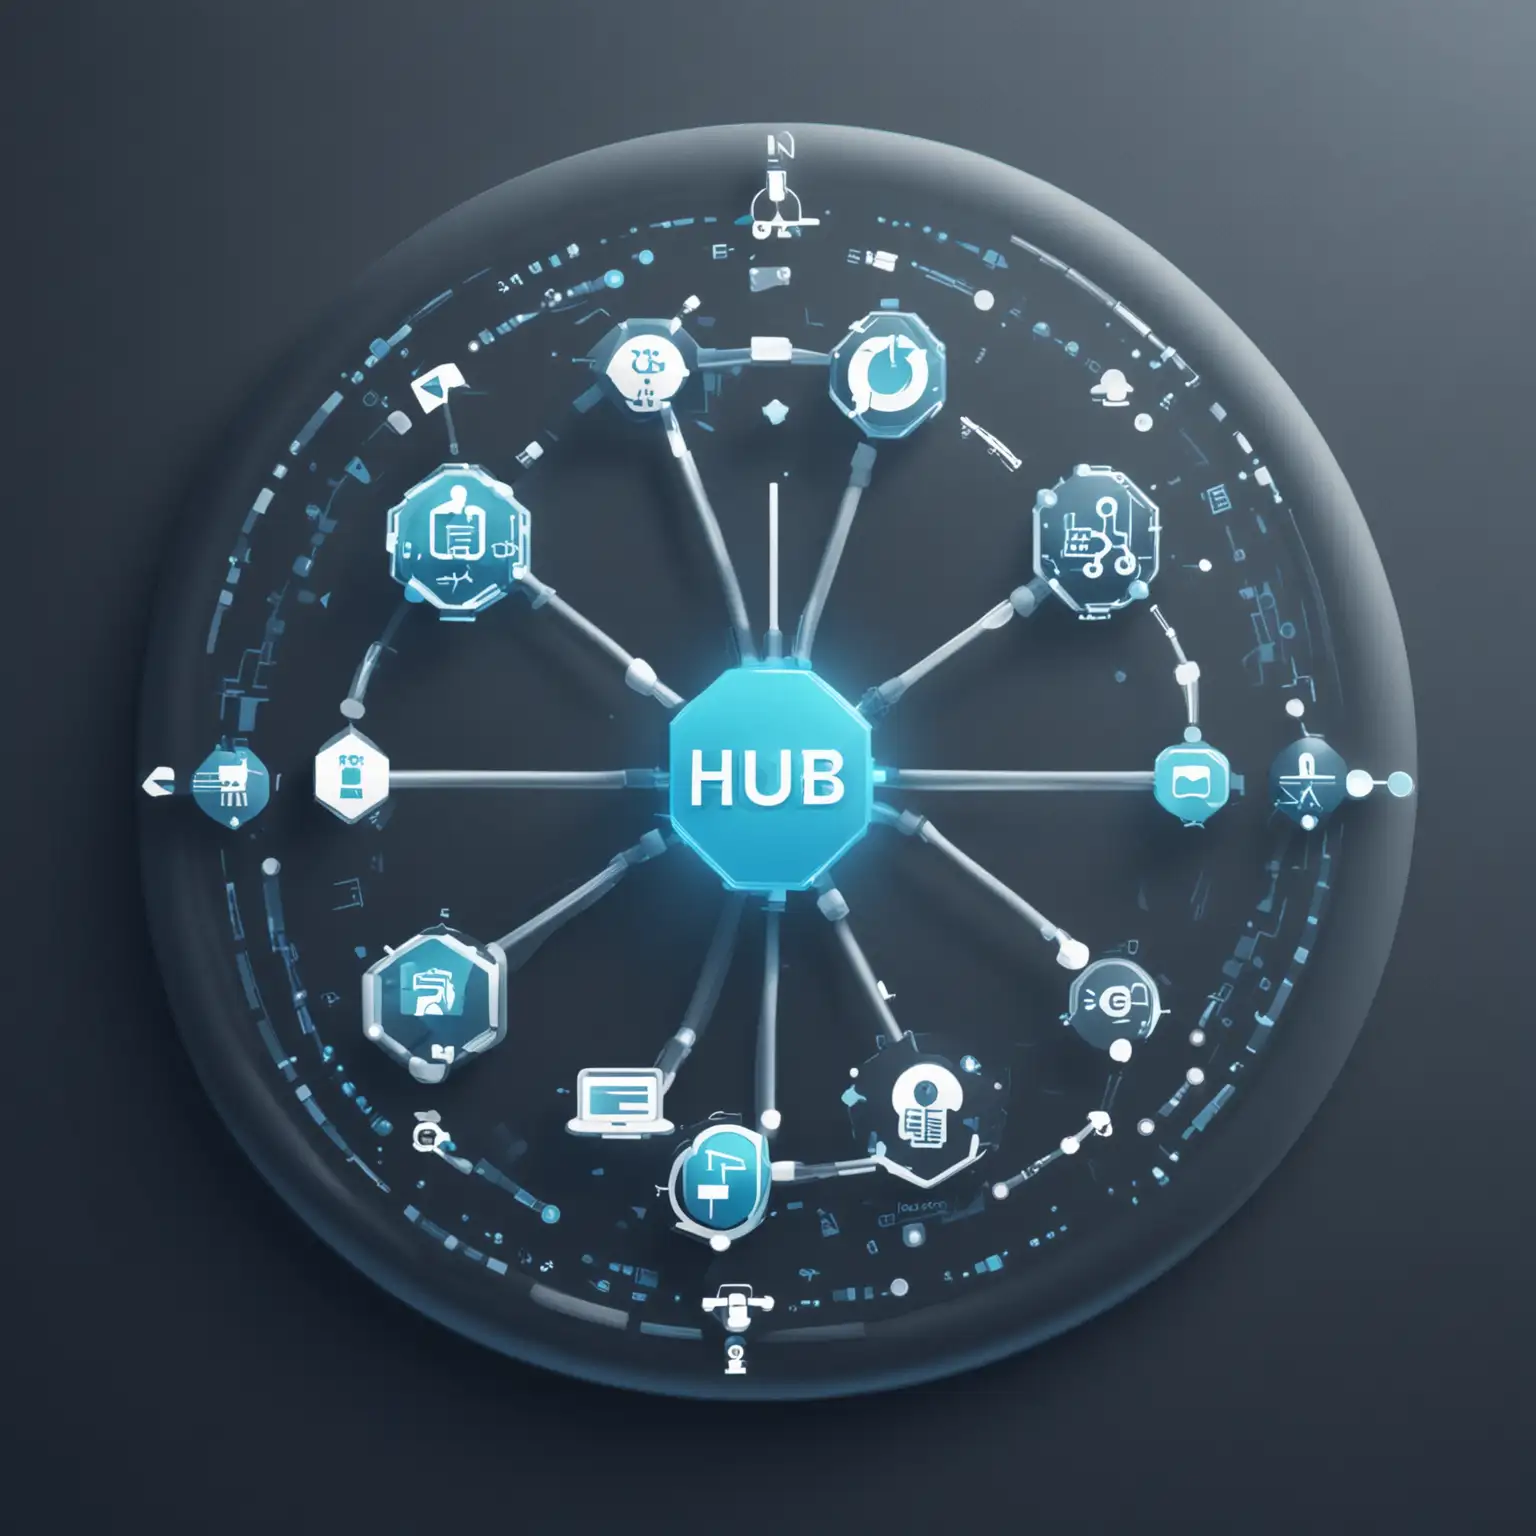 icon depicting digital hub—connections